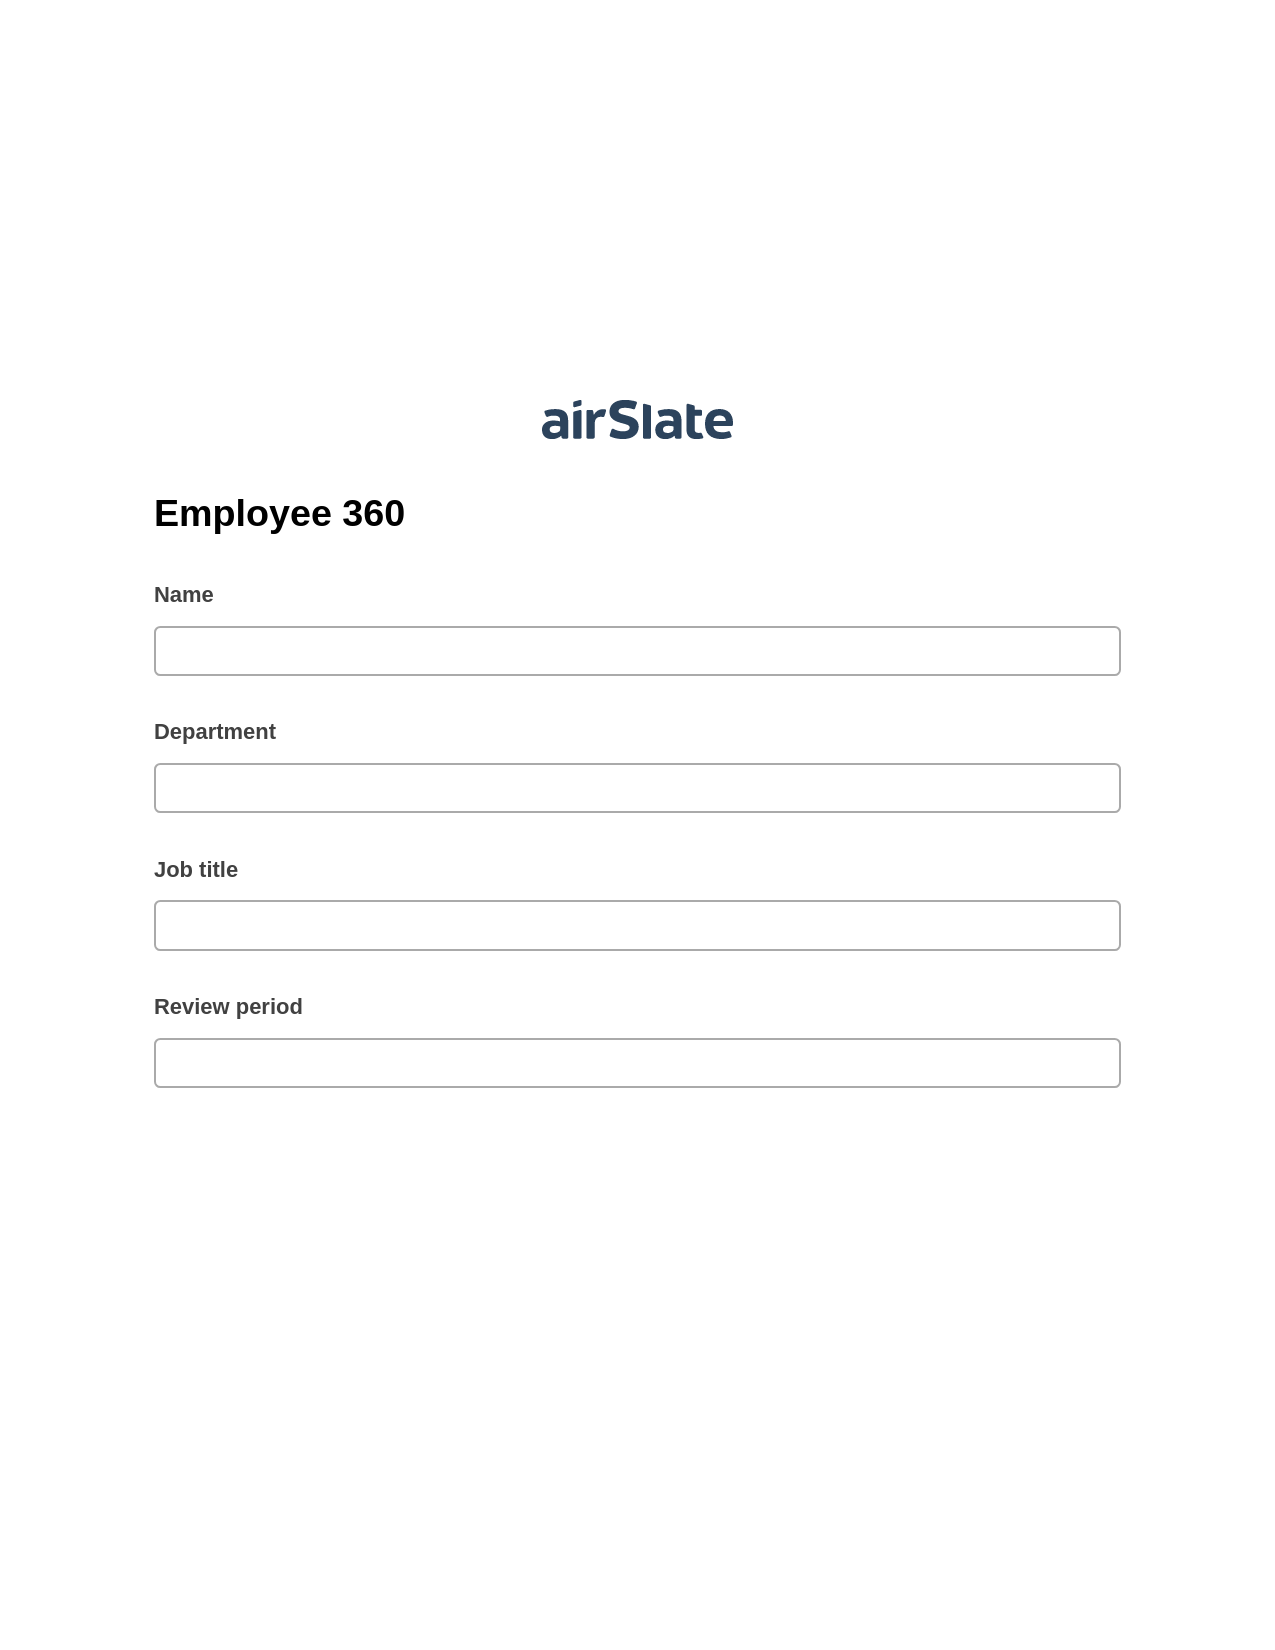 Employee 360 Pre-fill from Salesforce Records Bot, Google Cloud Print Bot, Post-finish Document Bot